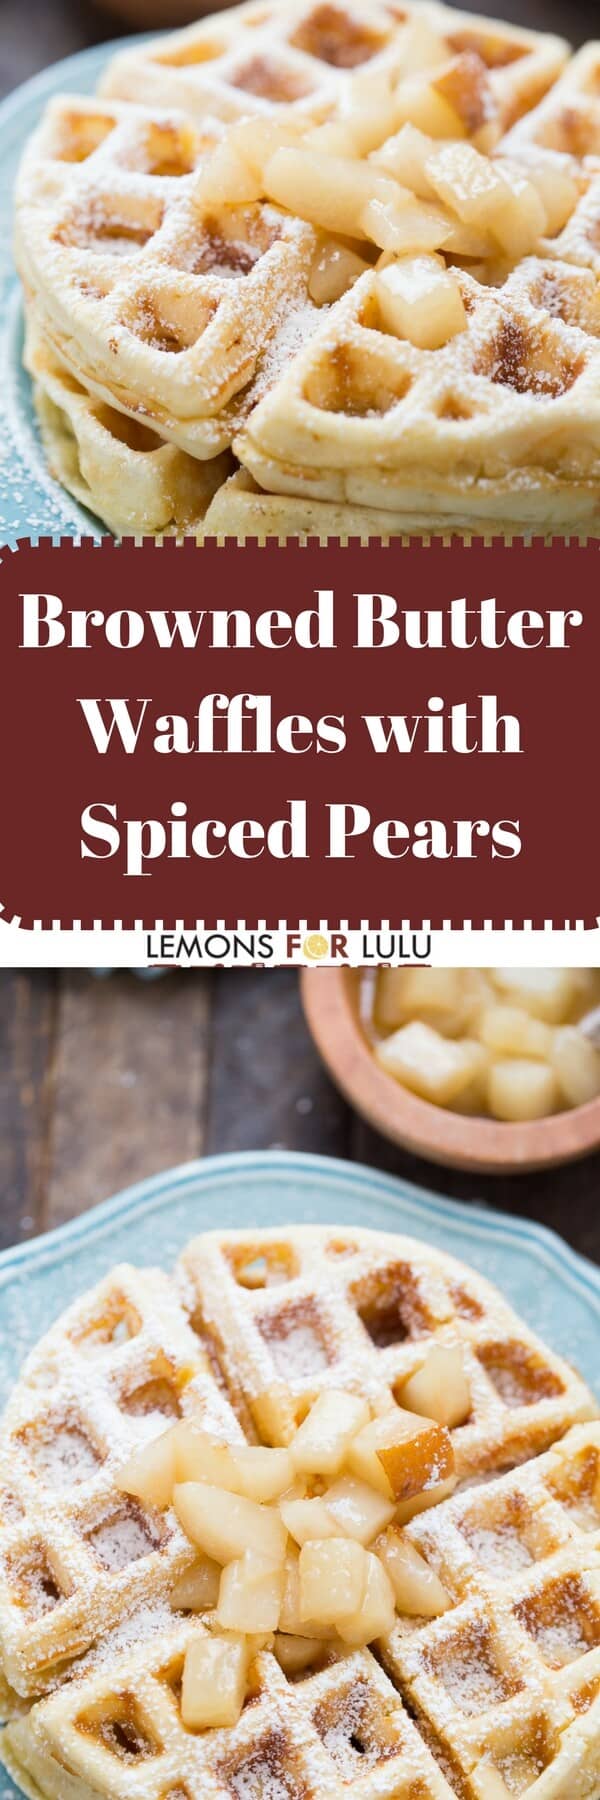 Homemade waffles are so easy! These browned butter waffles taste buttery and sweet, don't forget the spiced rum pear topping!